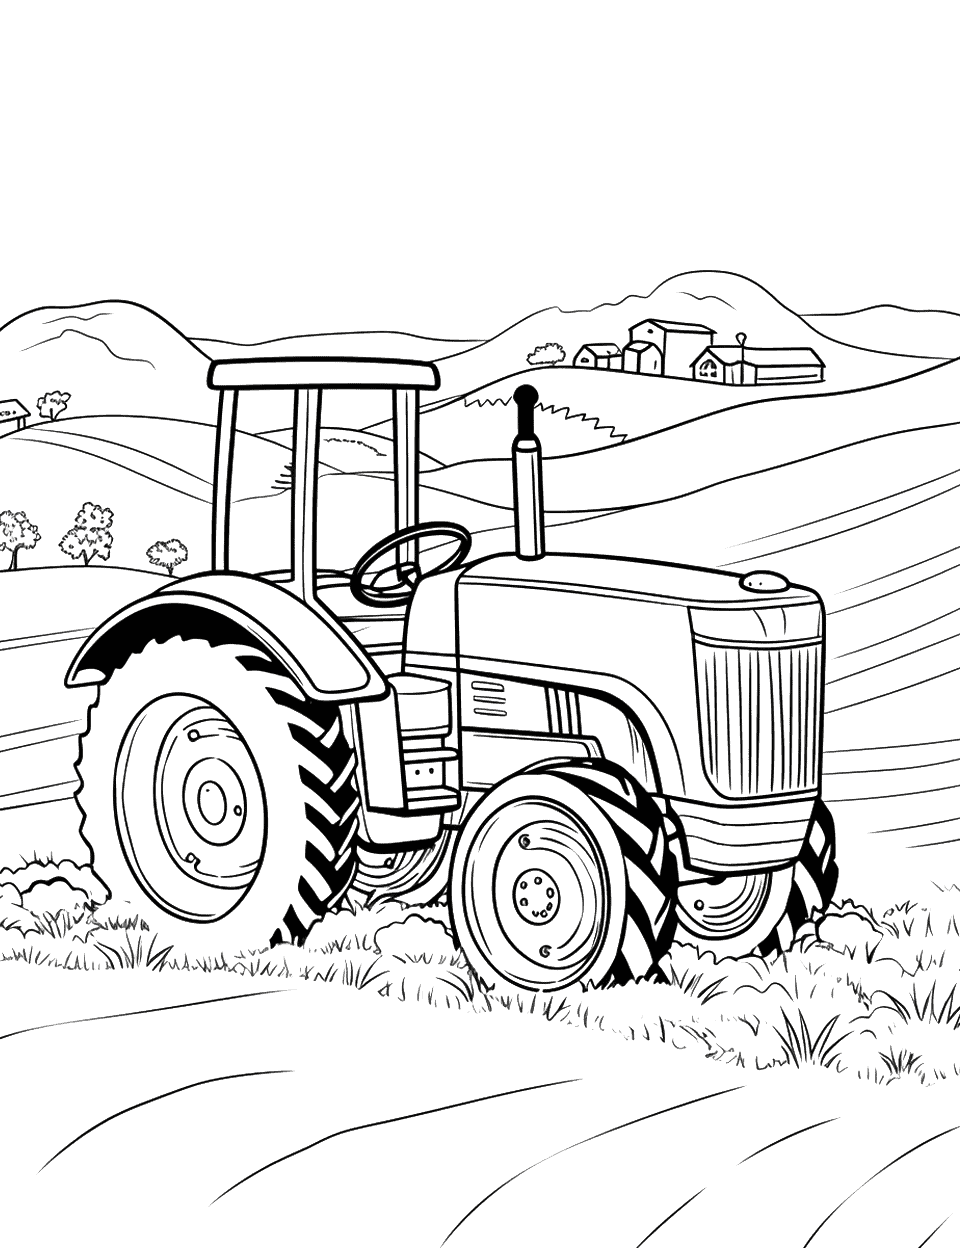 Tractor on a Hill Coloring Page - A tractor positioned on a hill, overlooking a vast farm landscape.